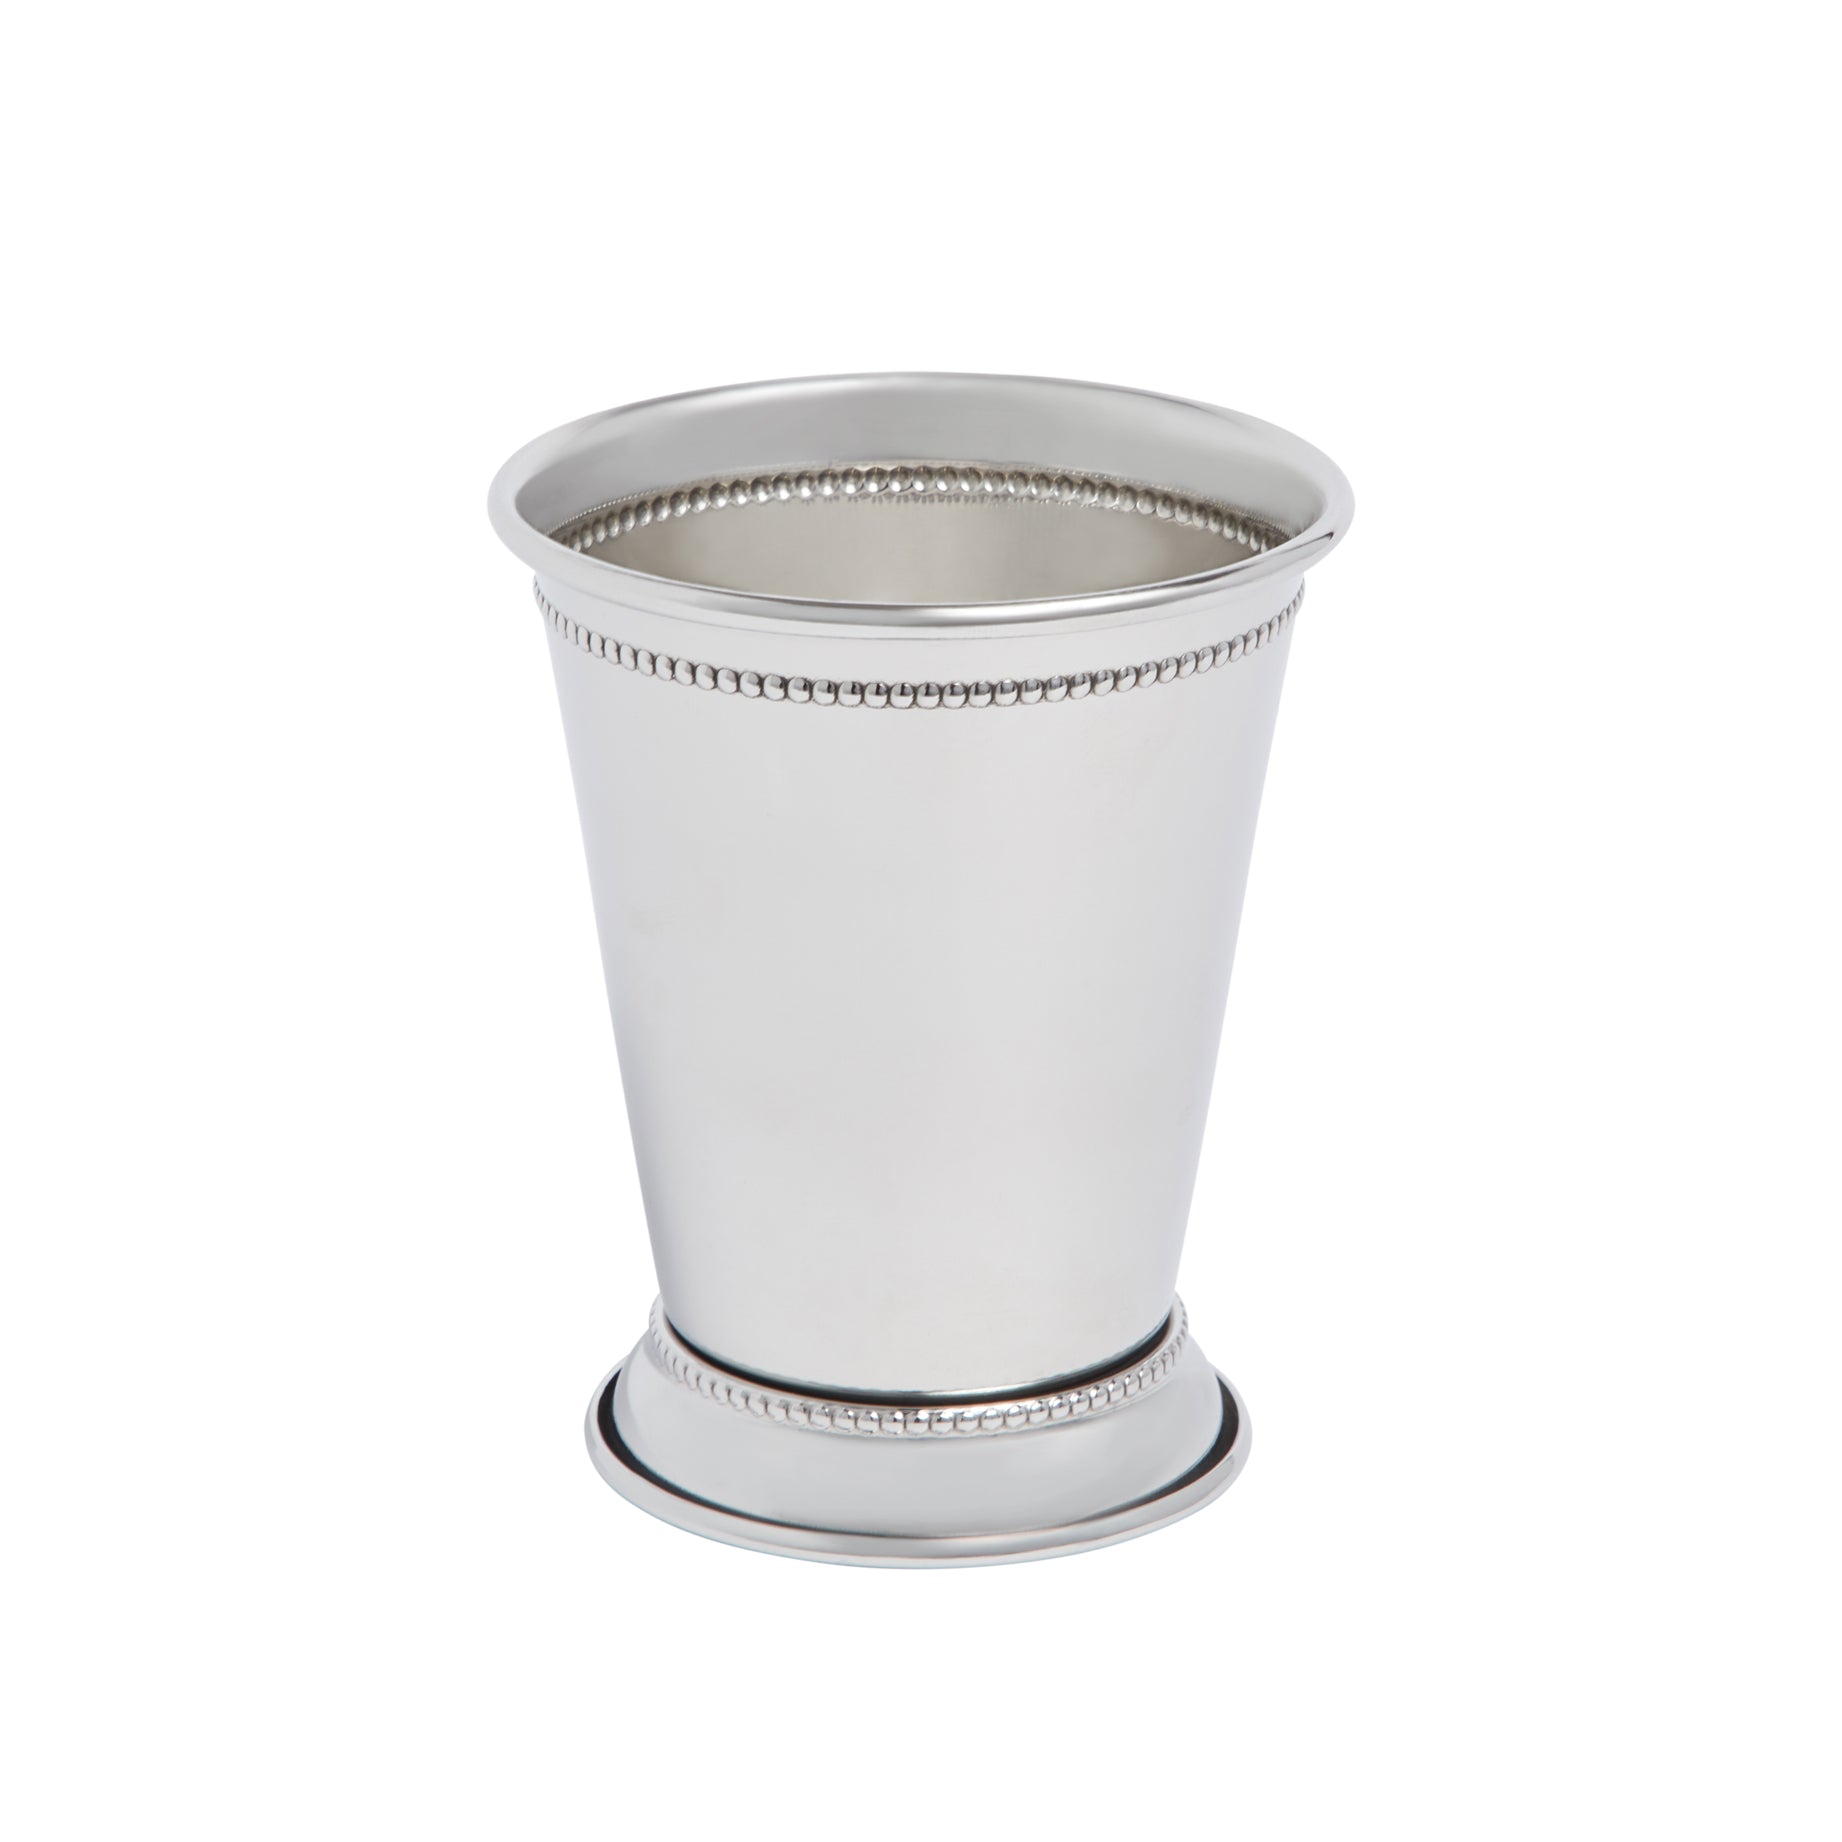 JULEP CUP – STAINLESS STEEL / 12oz (360ml)